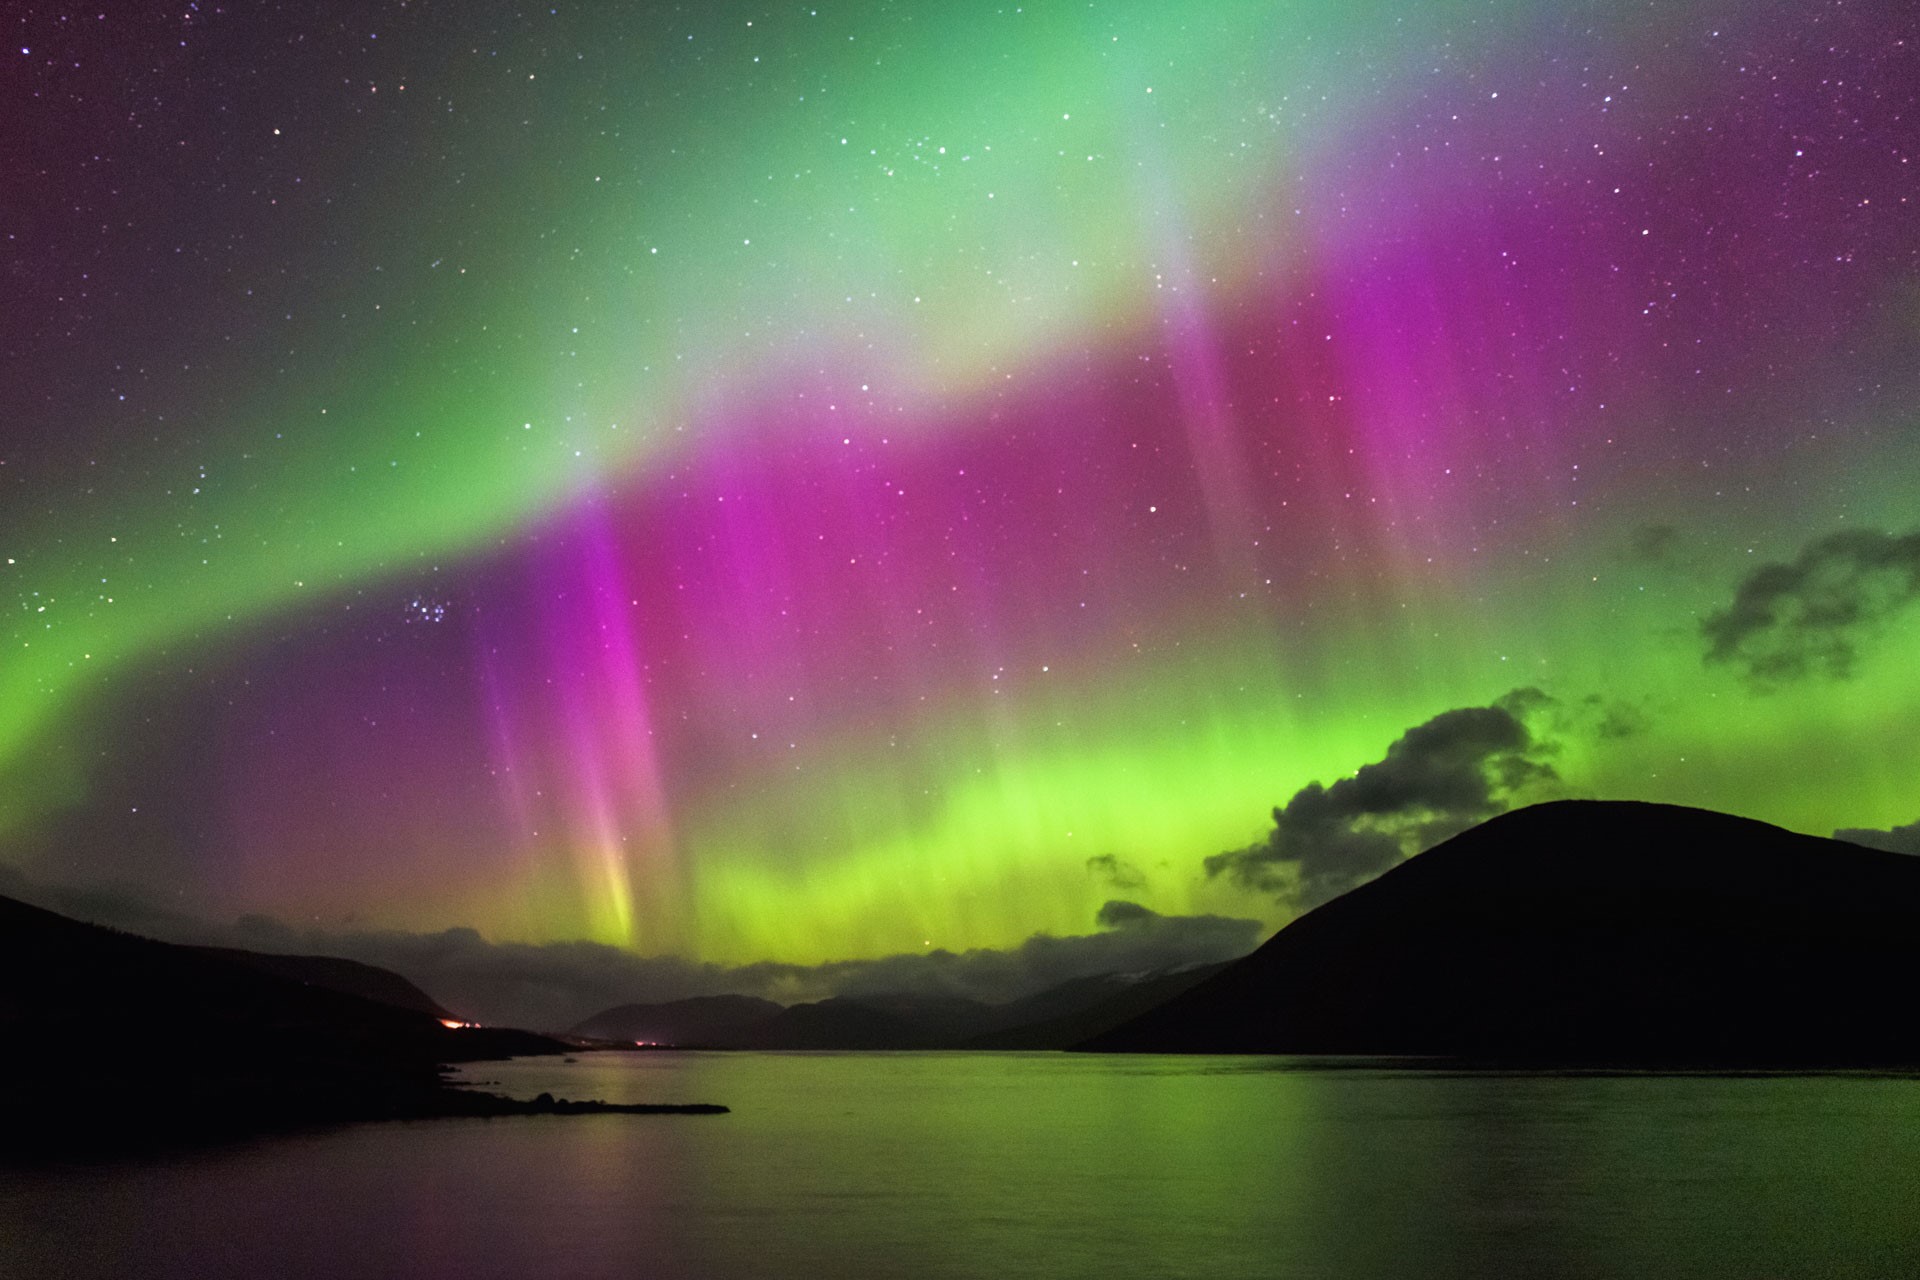 When Will We Next See The Northern Lights In The UK?